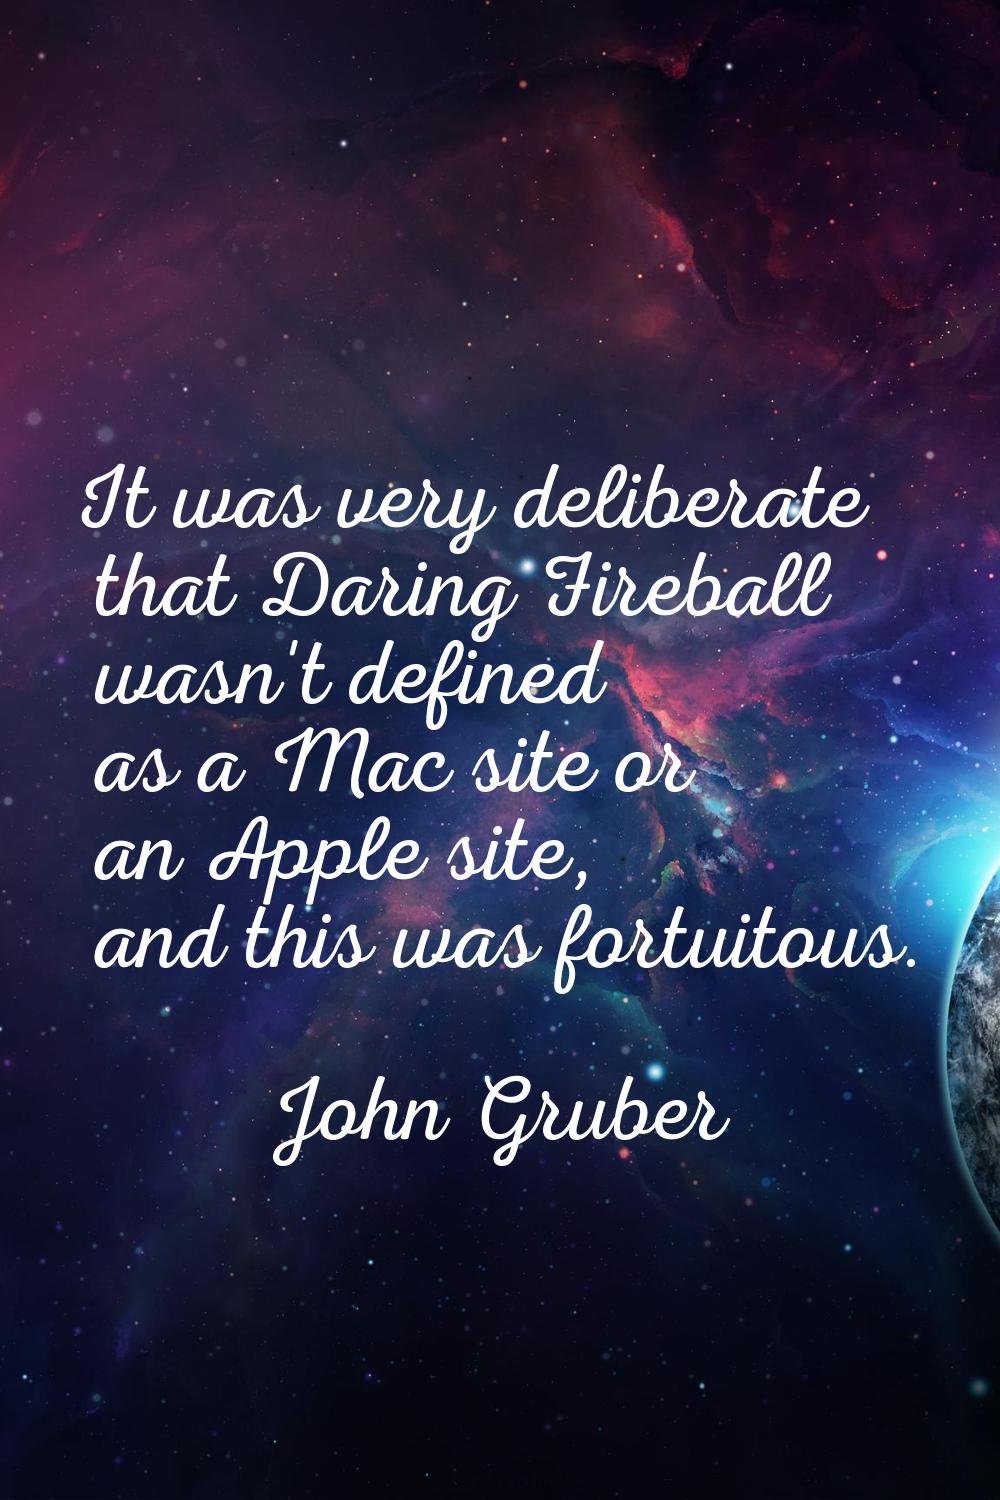 It was very deliberate that Daring Fireball wasn't defined as a Mac site or an Apple site, and this